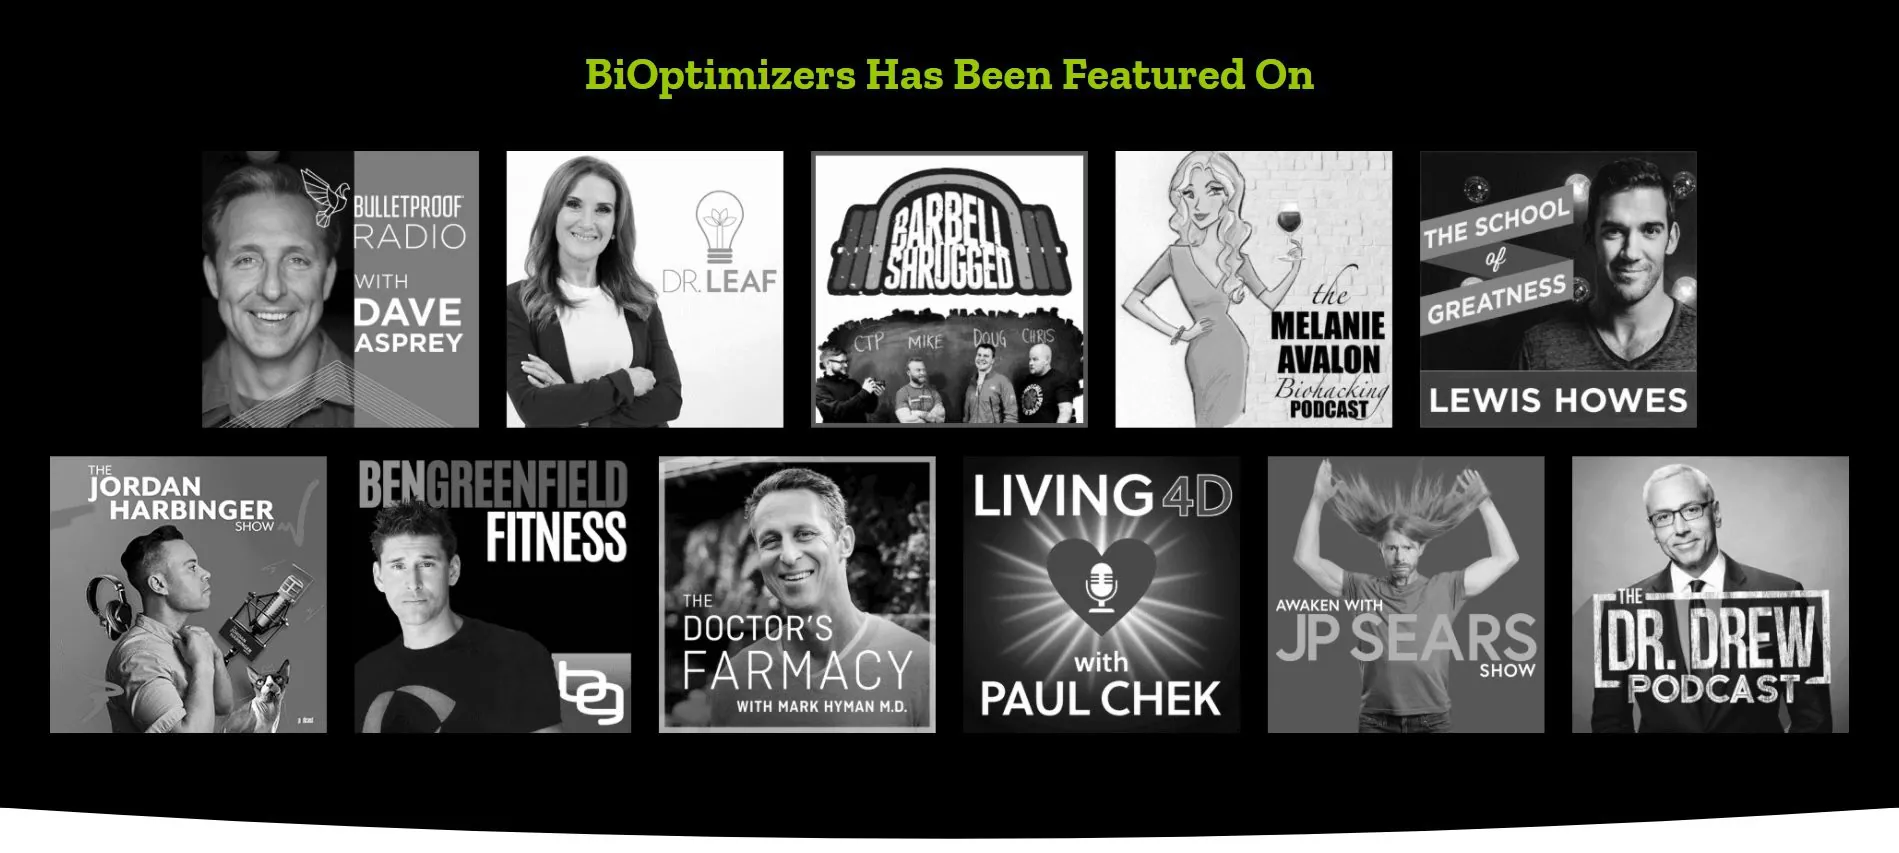 Bioptimizers featured on